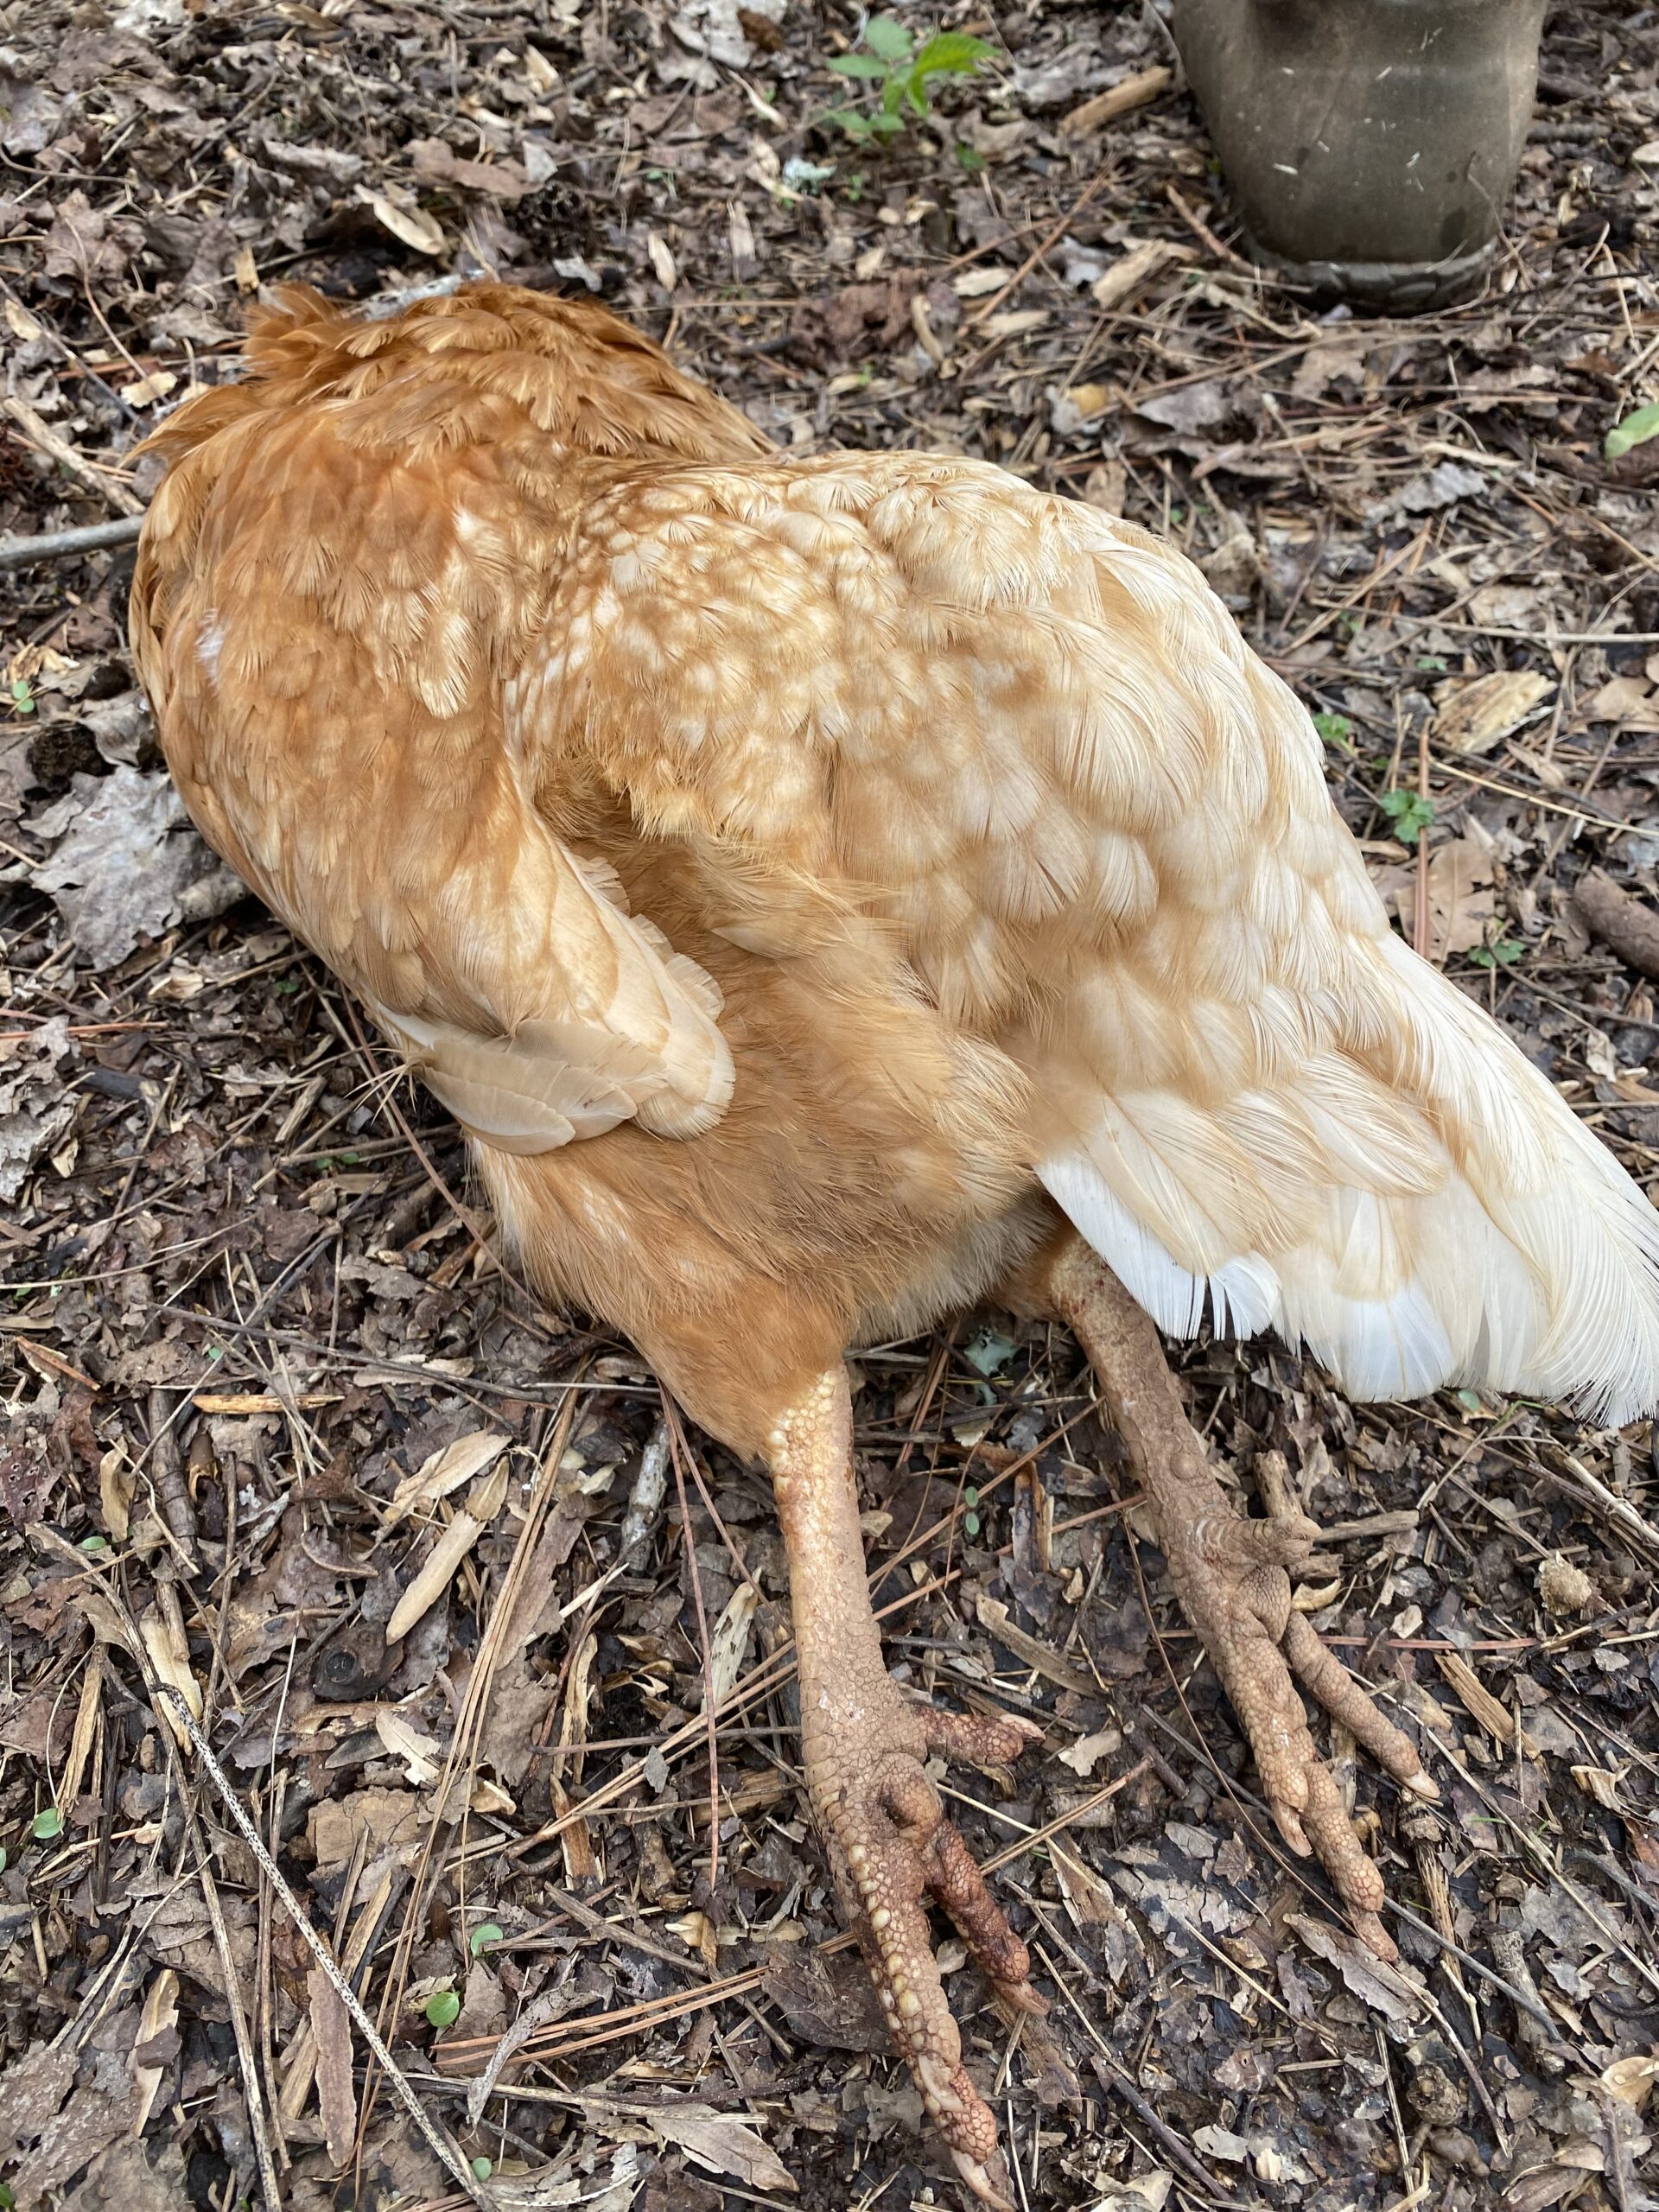 One of our largest hens (a Cinnamon Queen) was killed by a hawk.